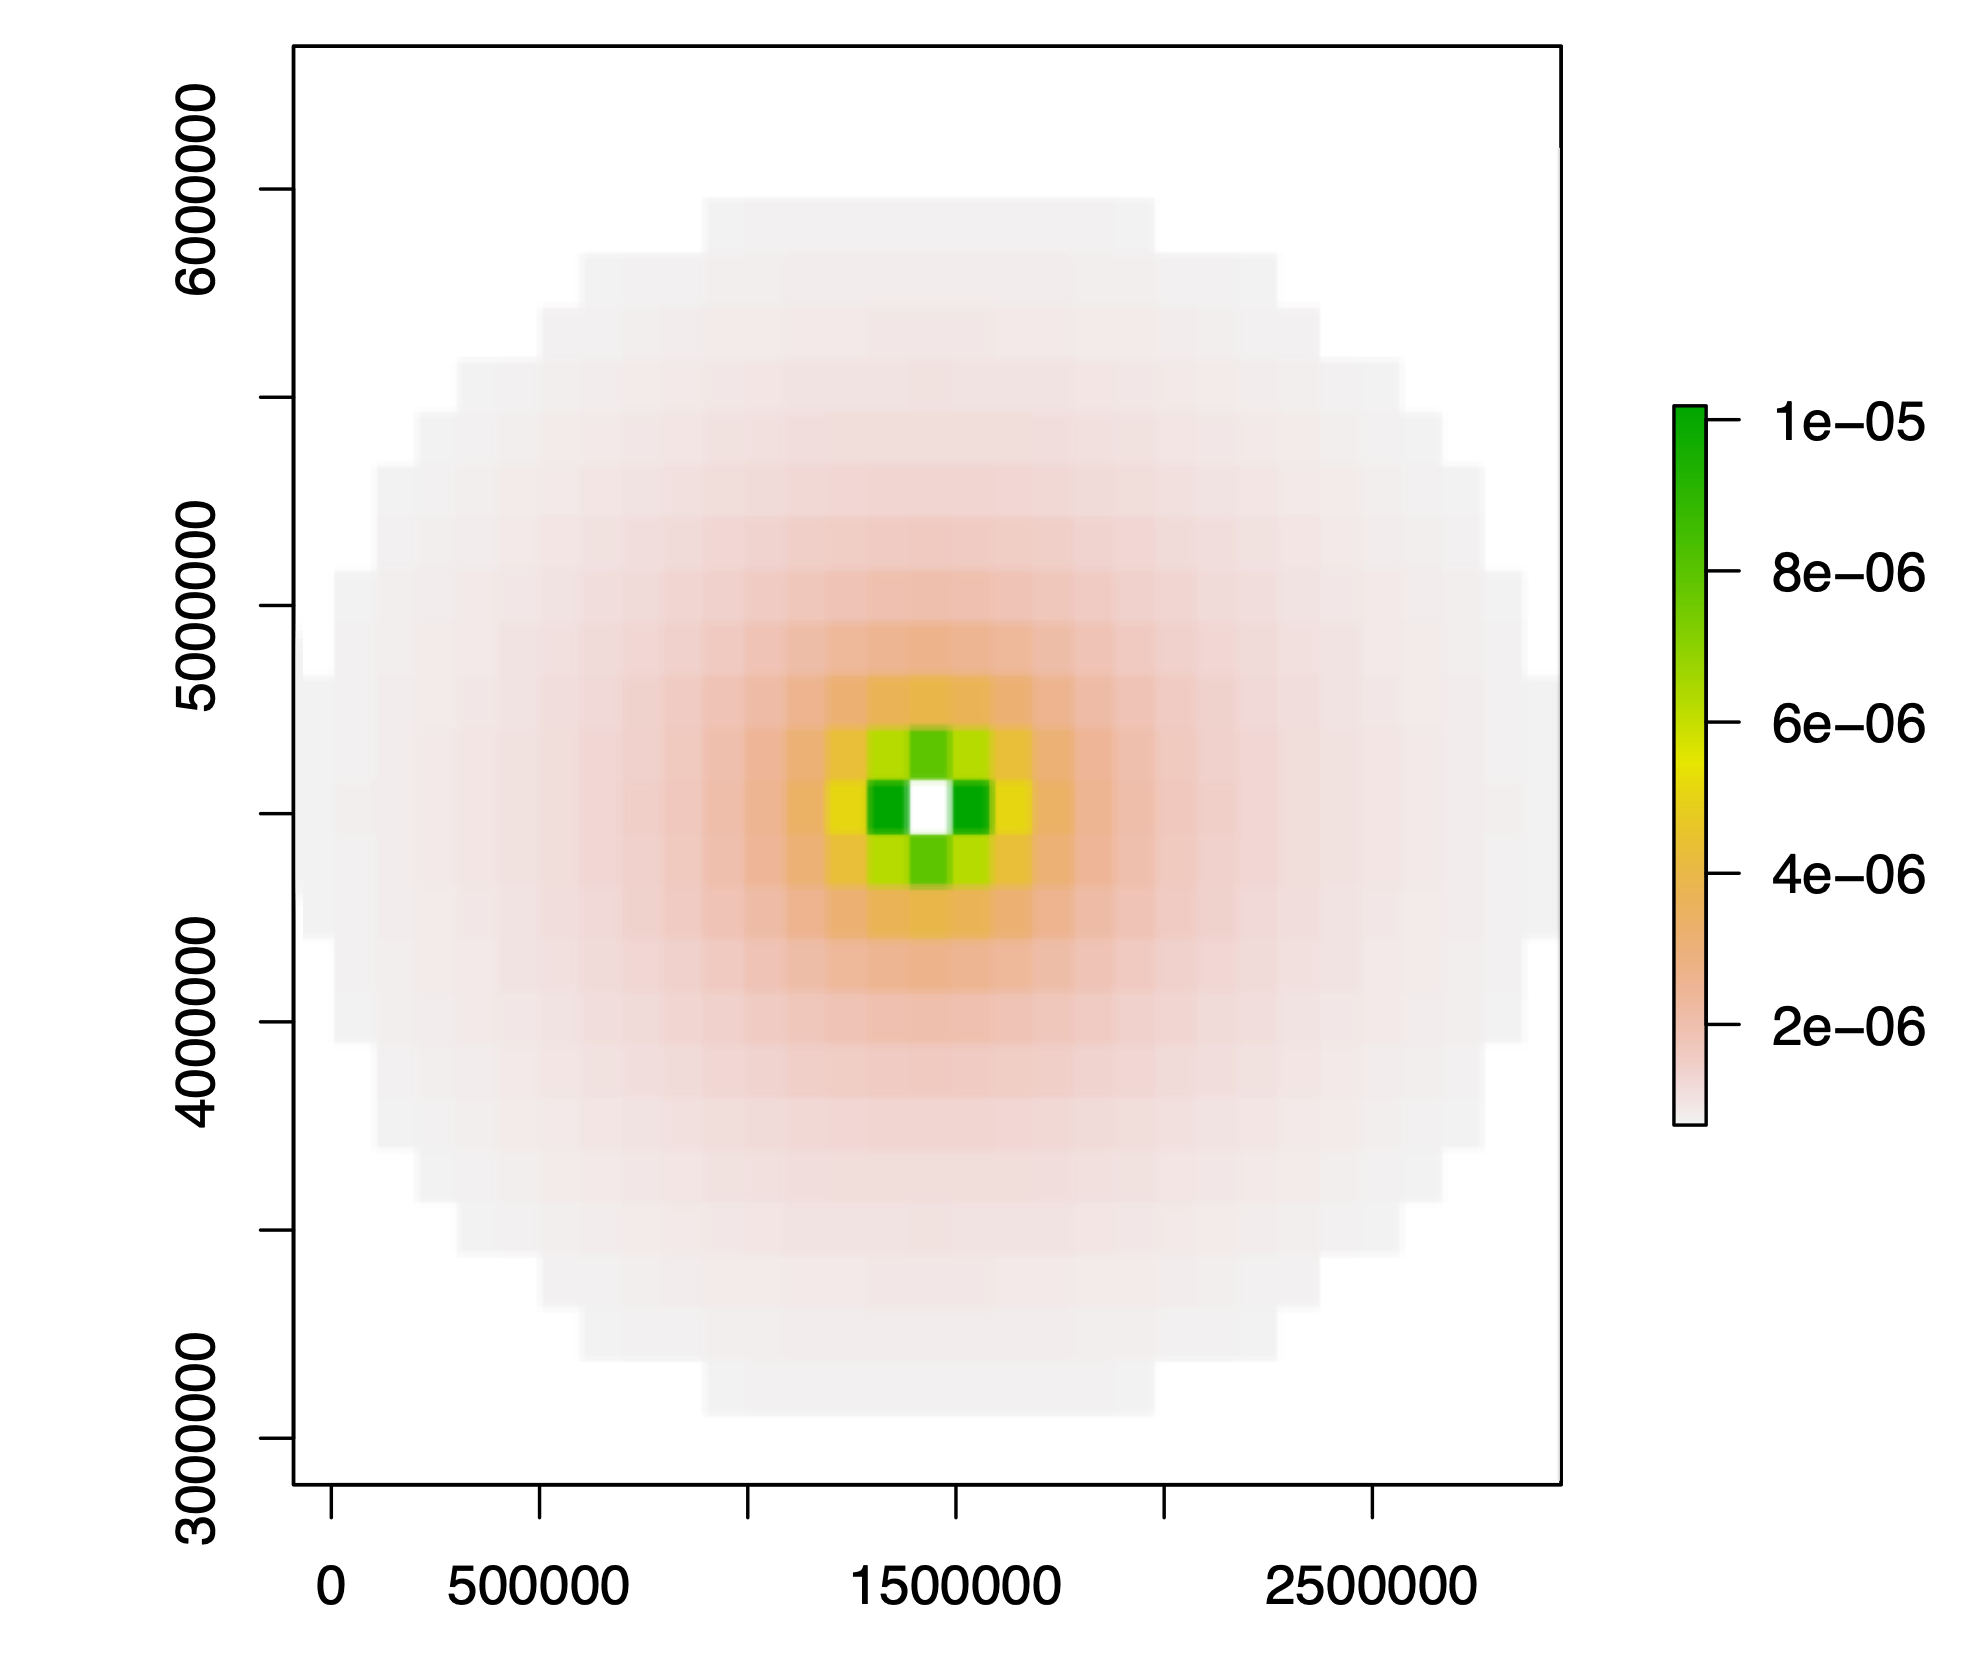 Cell selection probabilities in weighted subsampling are proportional to the inverse of the squared distance from the center, colored as a heatmap in this example. The seed cell is always included in weighted subsamples.